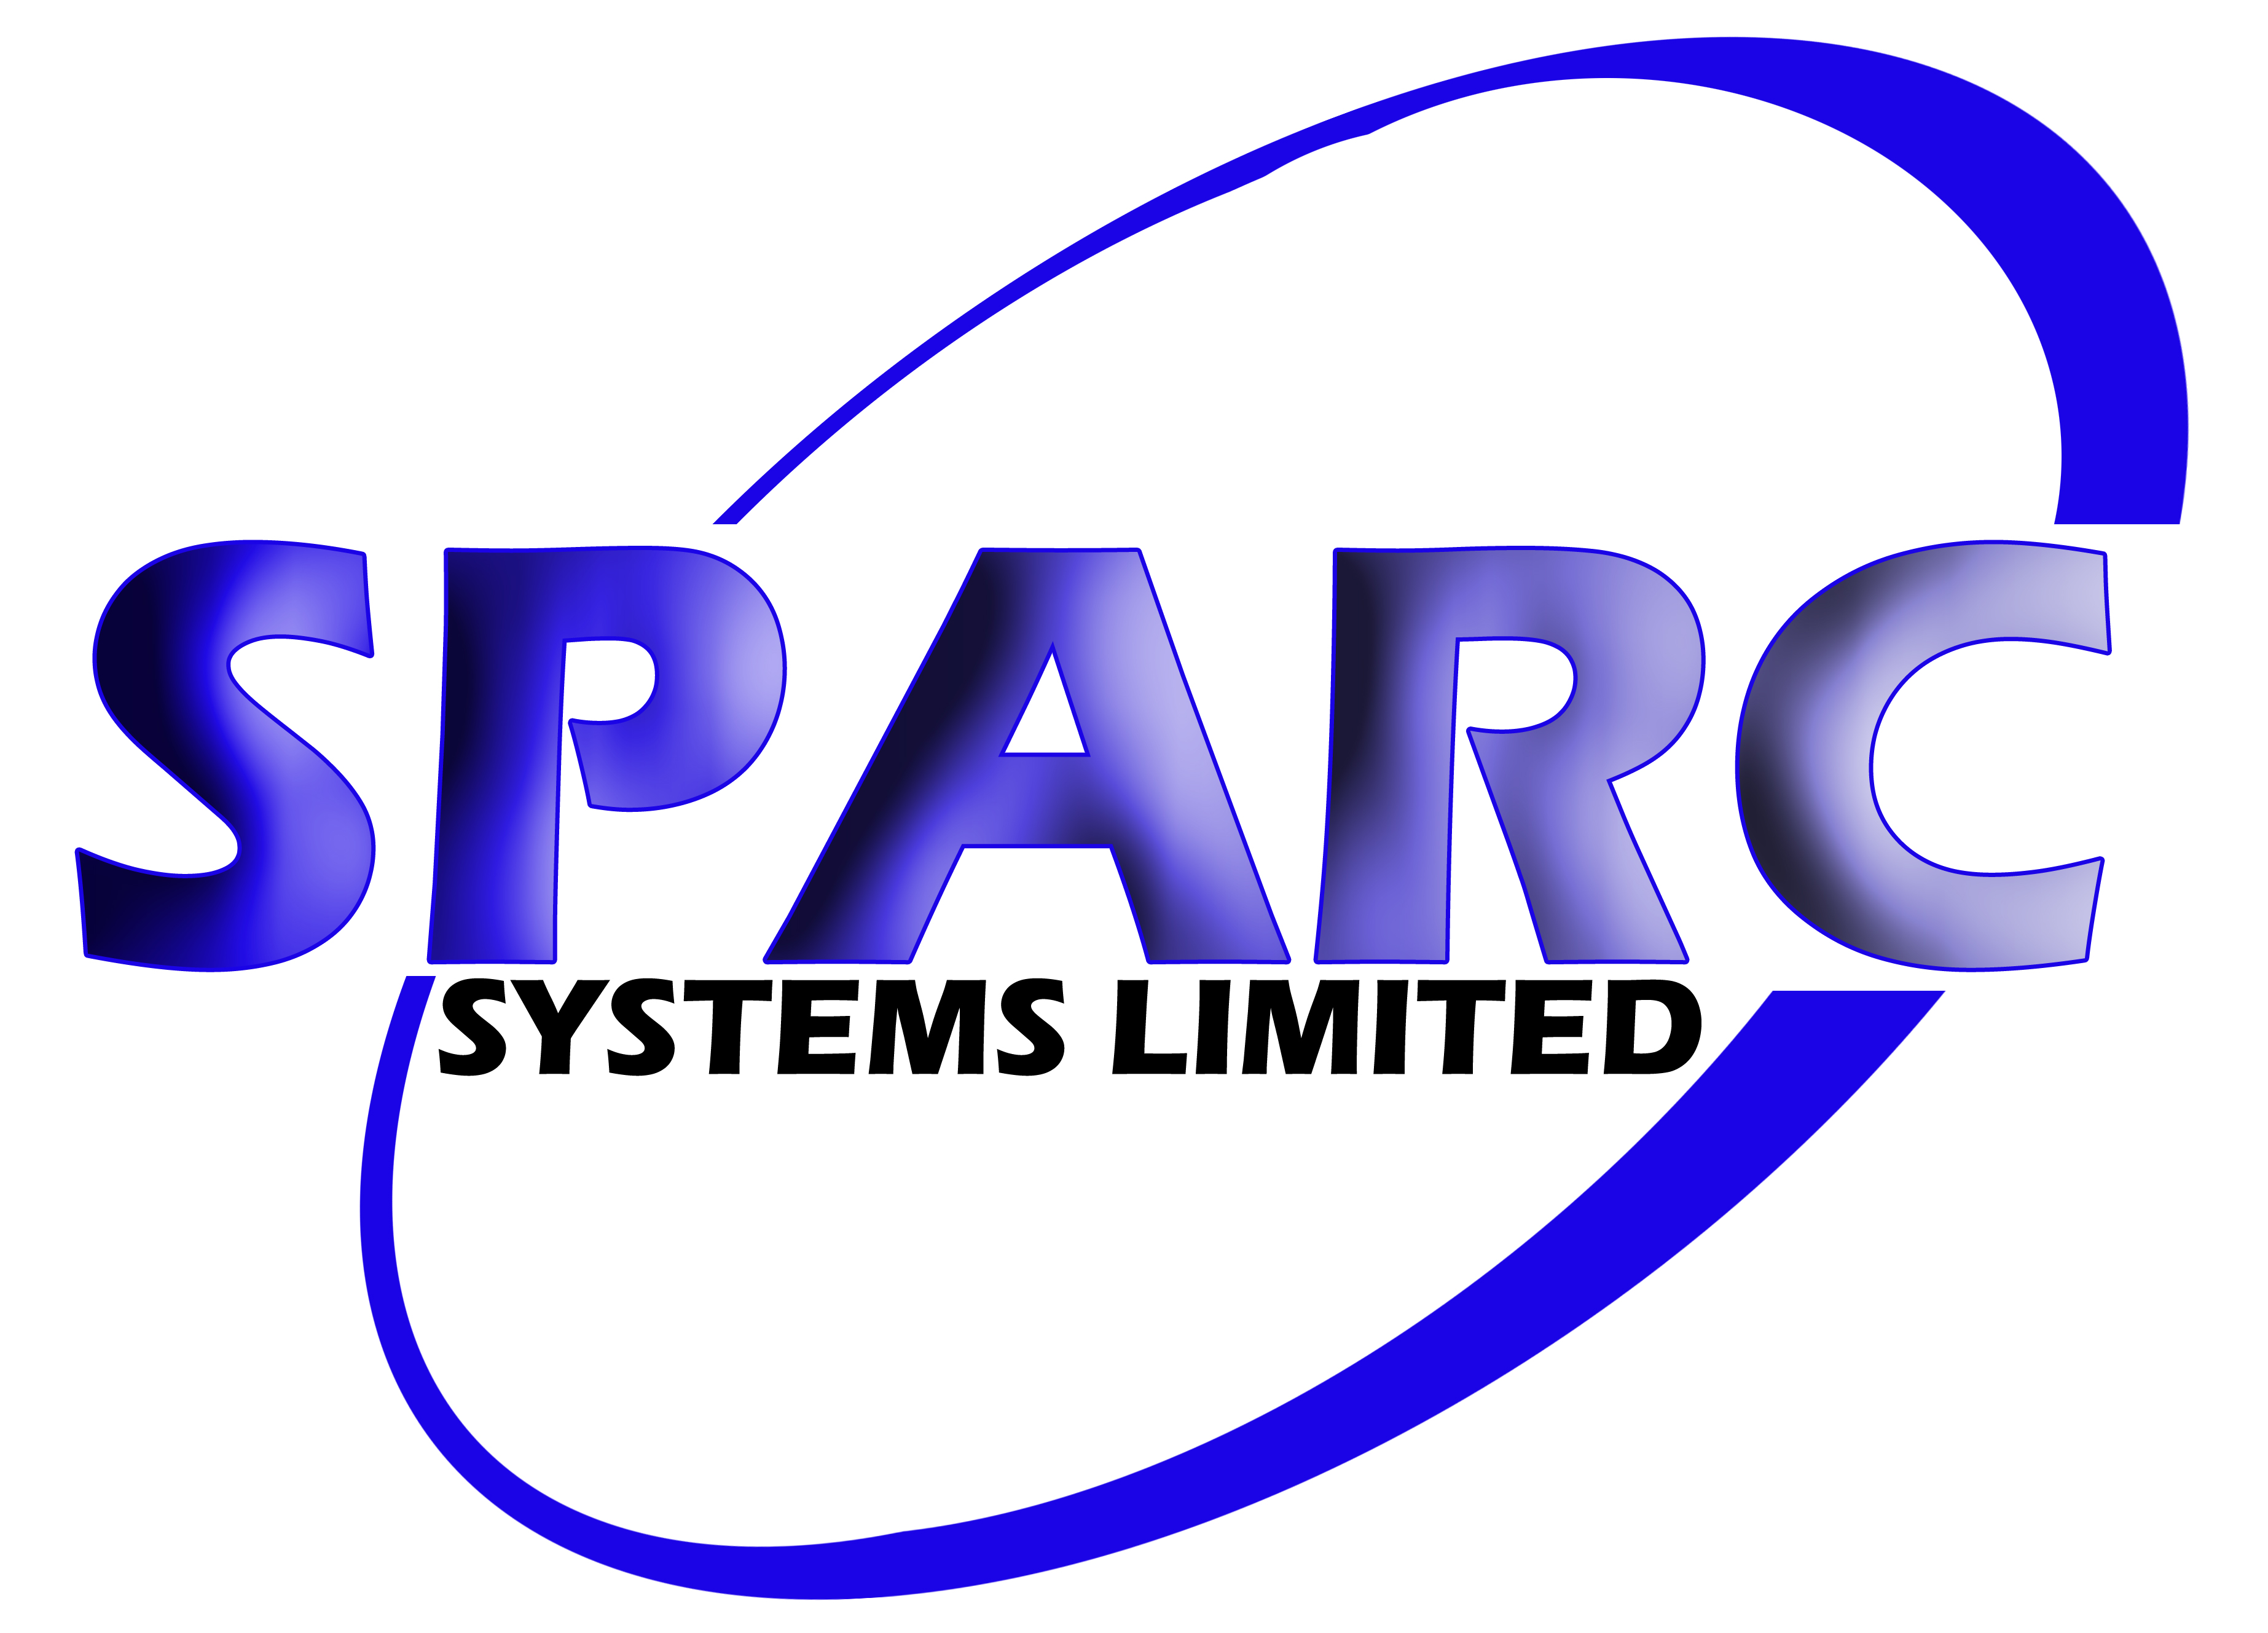 sparc systems limited logo